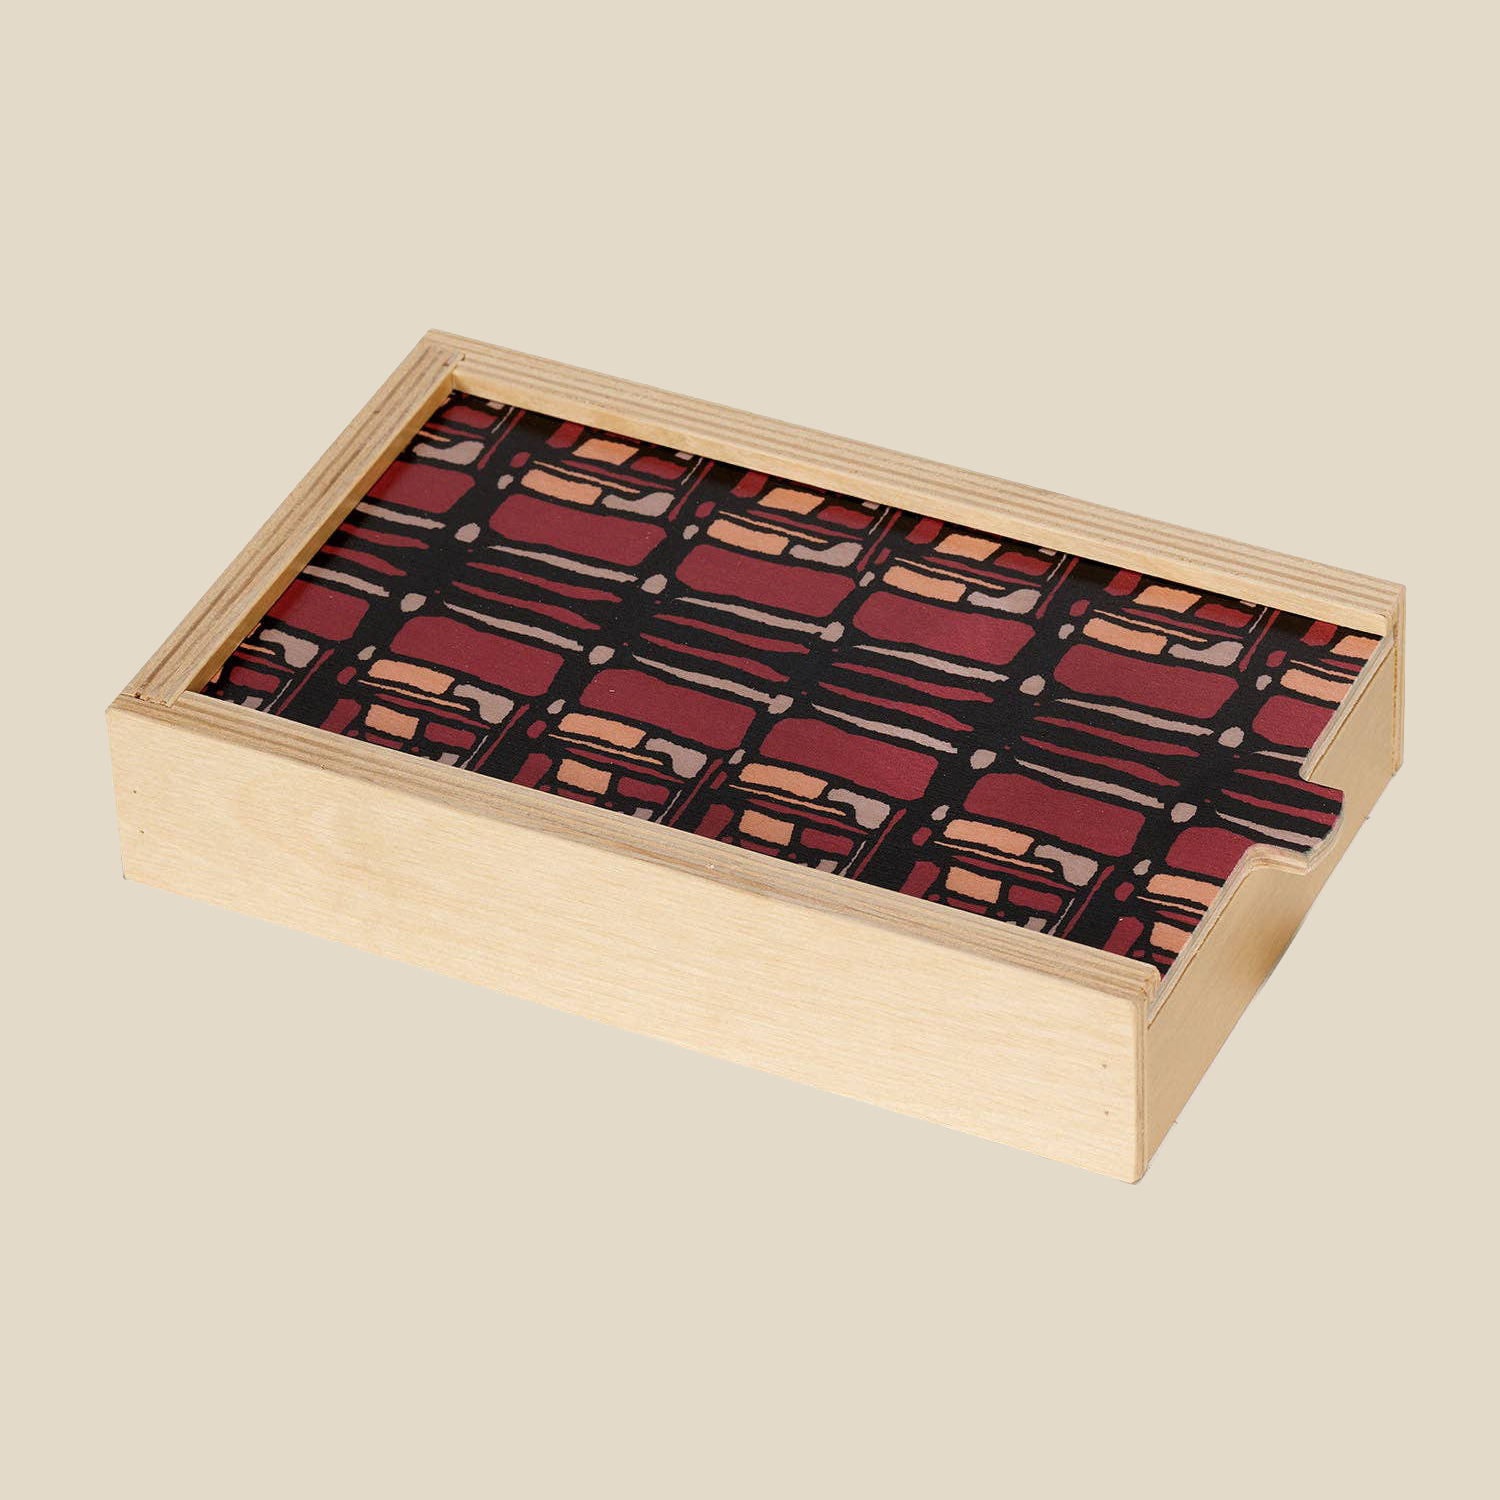 wooden domino set wolfum studio. The birch box has a sliding top which is decorated with a maroon and black pattern. The box is fully closed and shows no domino pieces.